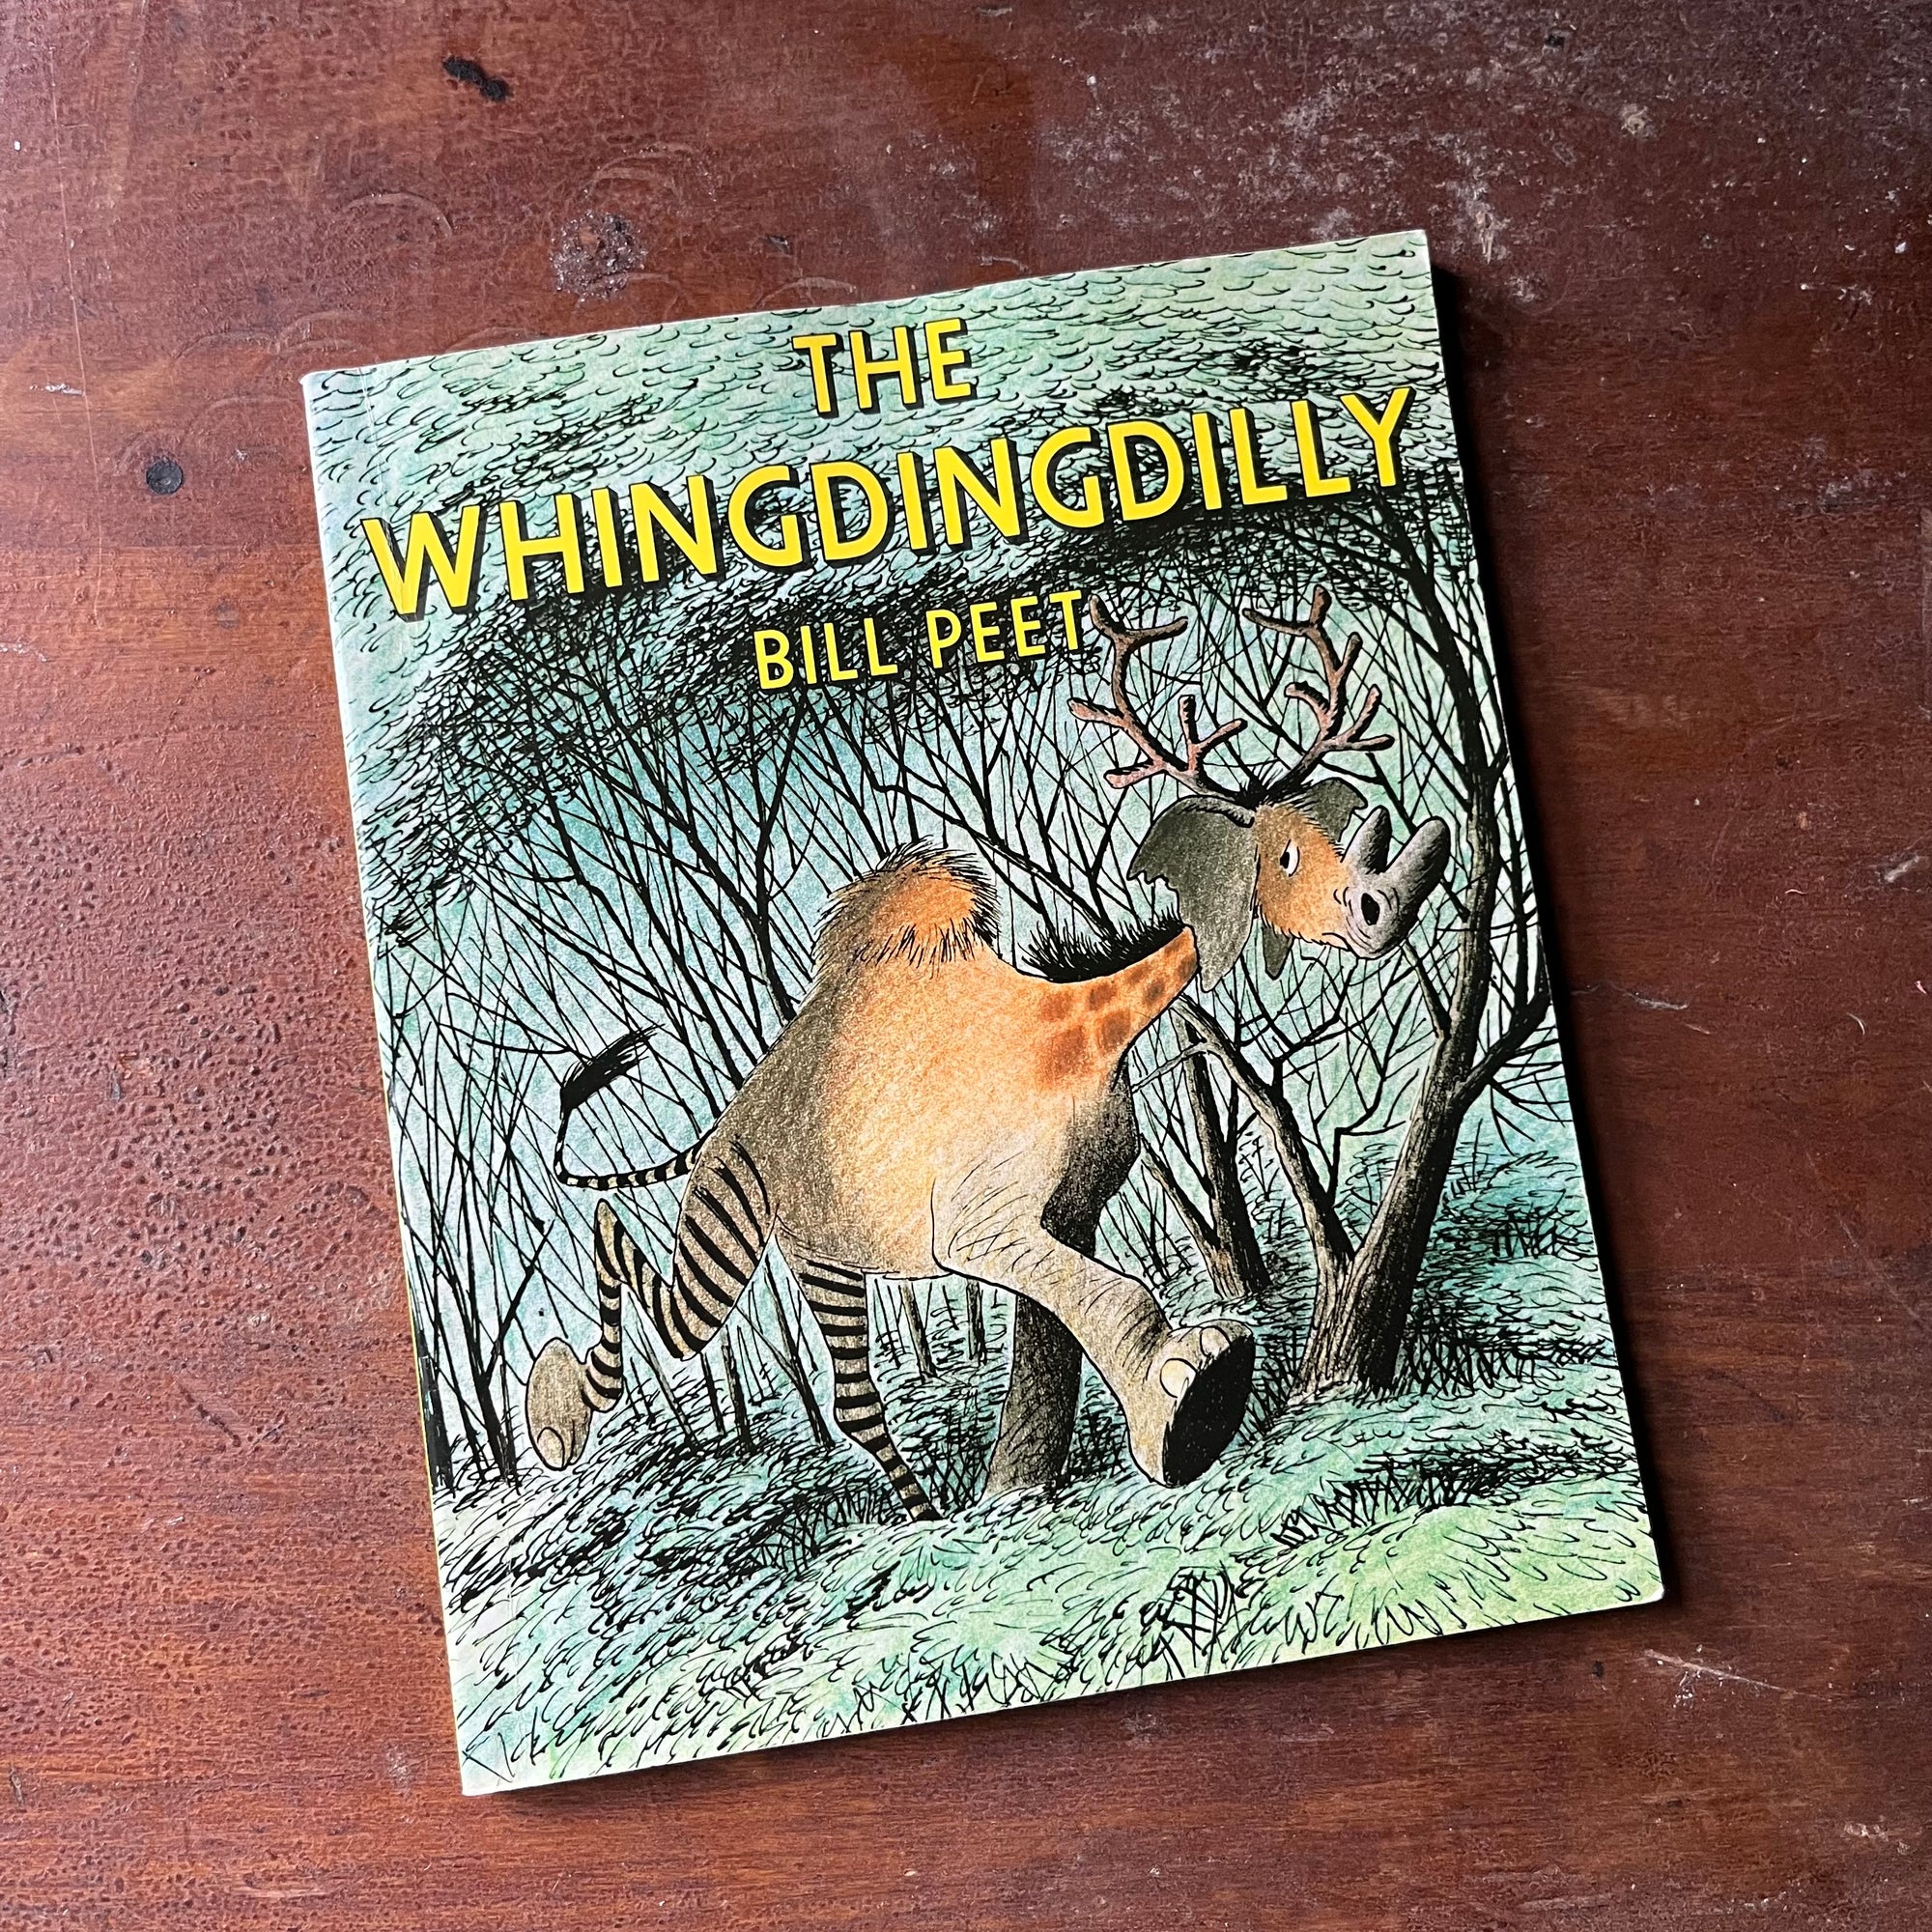 vintage children's picture book - The Whingdingdilly story and illustrations by Bill Peet - view of the glossy front cover